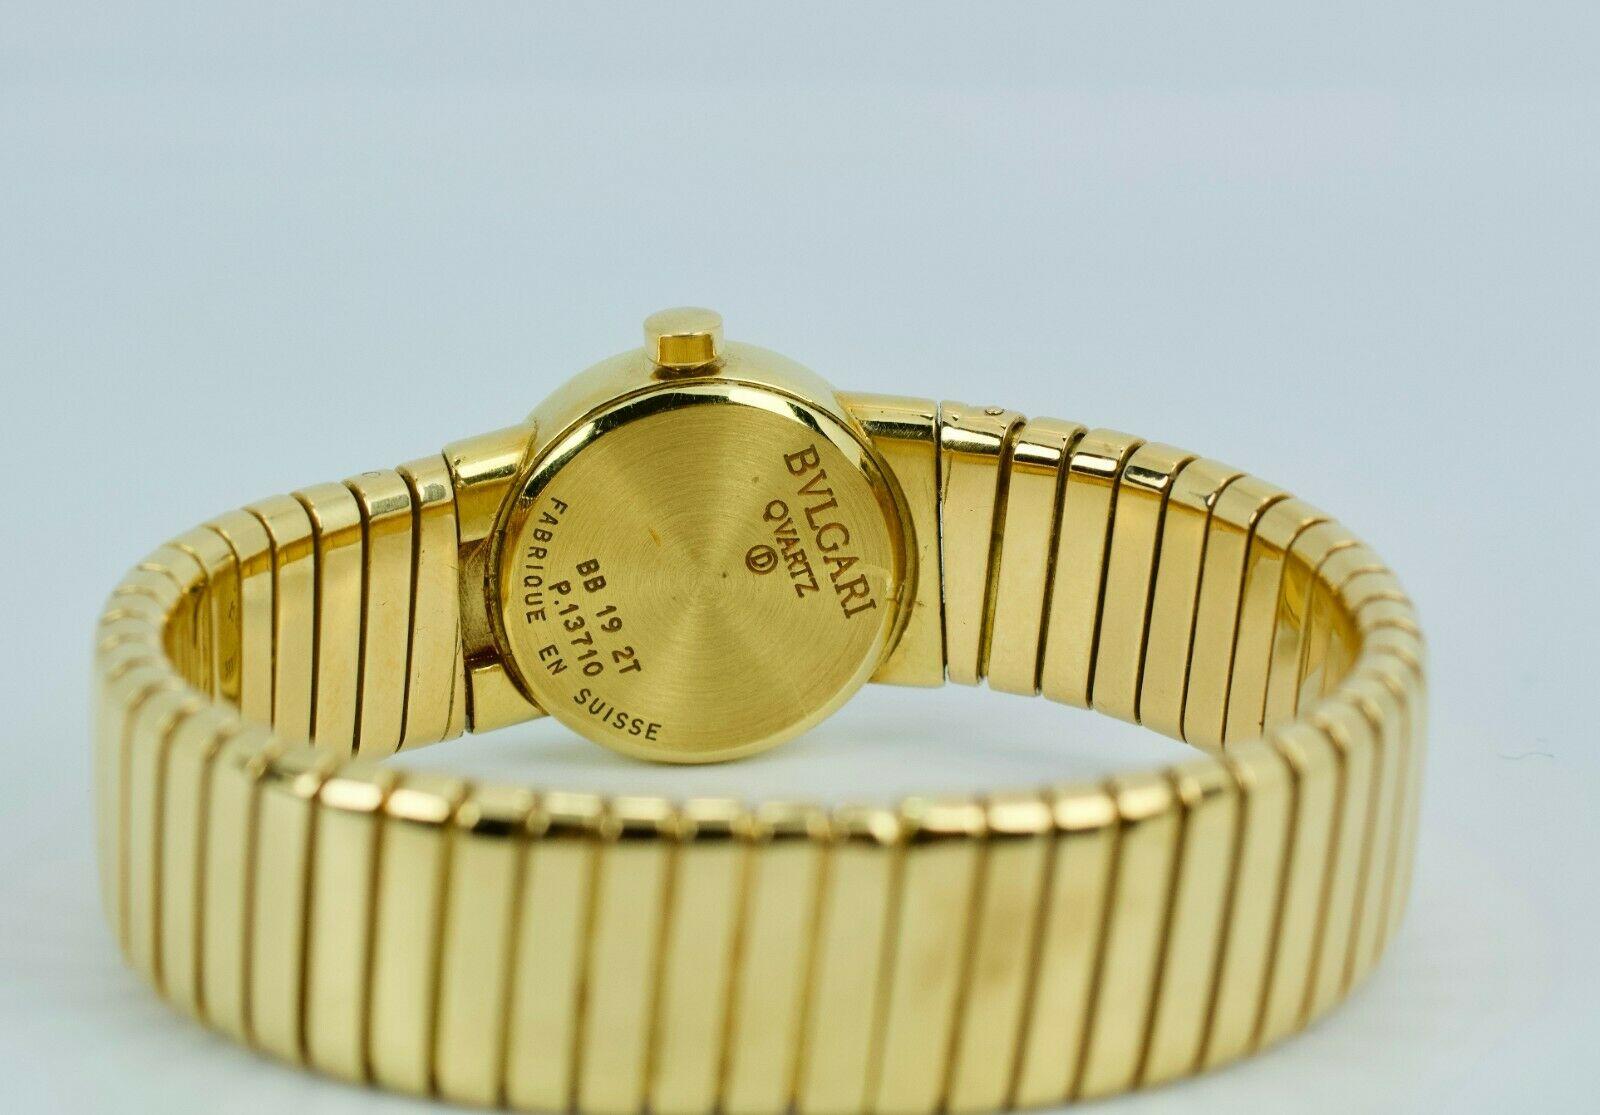 Bvlgari Tubogas 18k Yellow Gold Flexible Watch with Box and Warranty Card 1